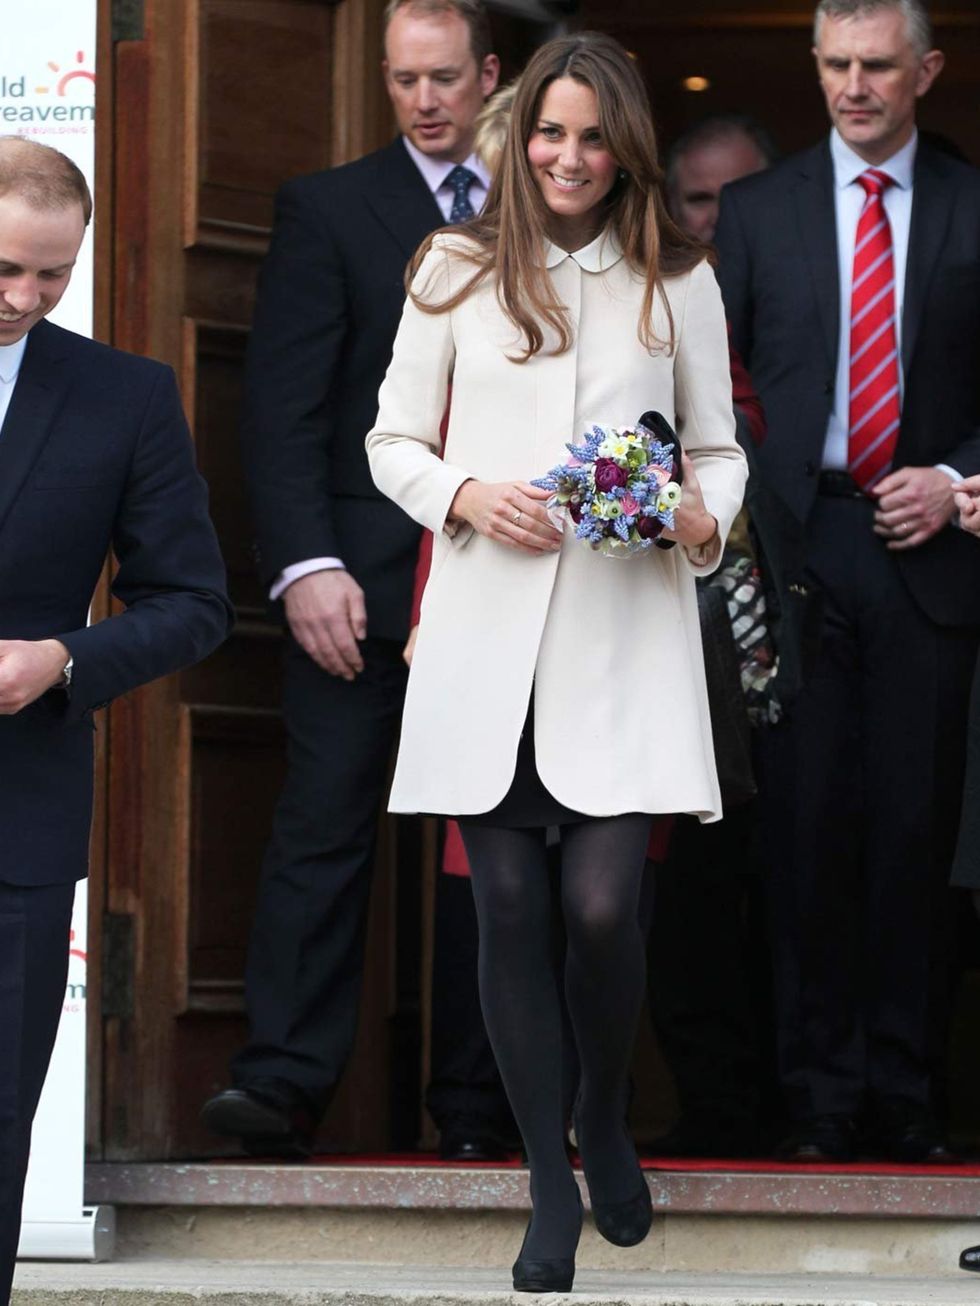 <p>Kate Middleton wearing a white coat visits the offices of Child Bereavement UK, March 2013.</p>